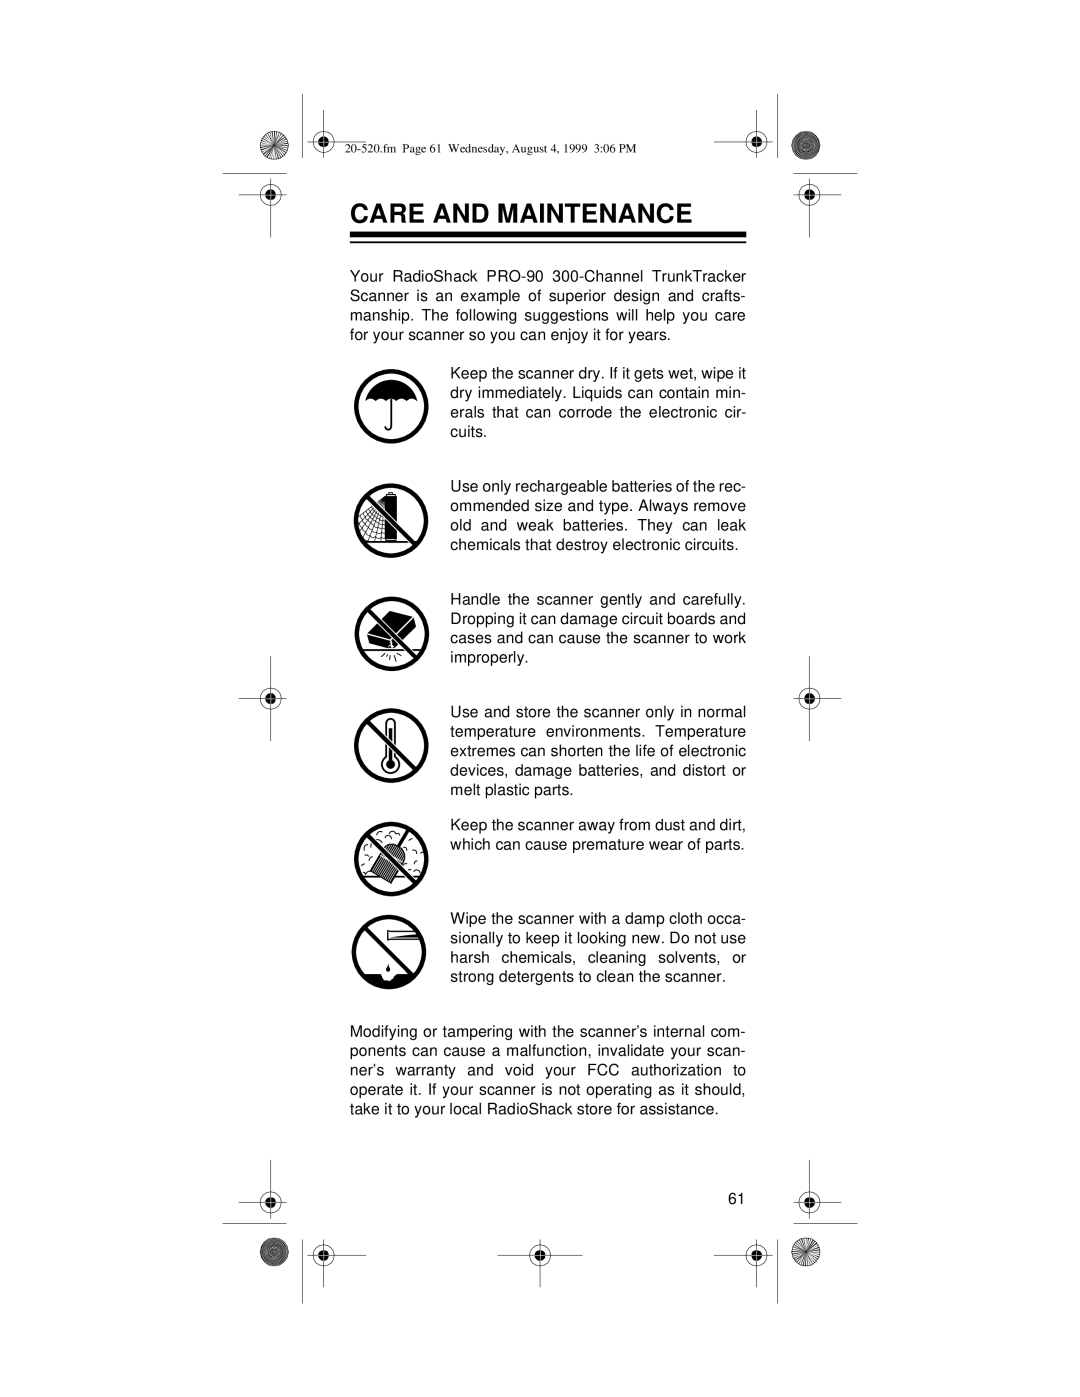 Radio Shack PRO-90 owner manual Care And Maintenance, fm Page 61 Wednesday, August 4, 1999 306 PM 